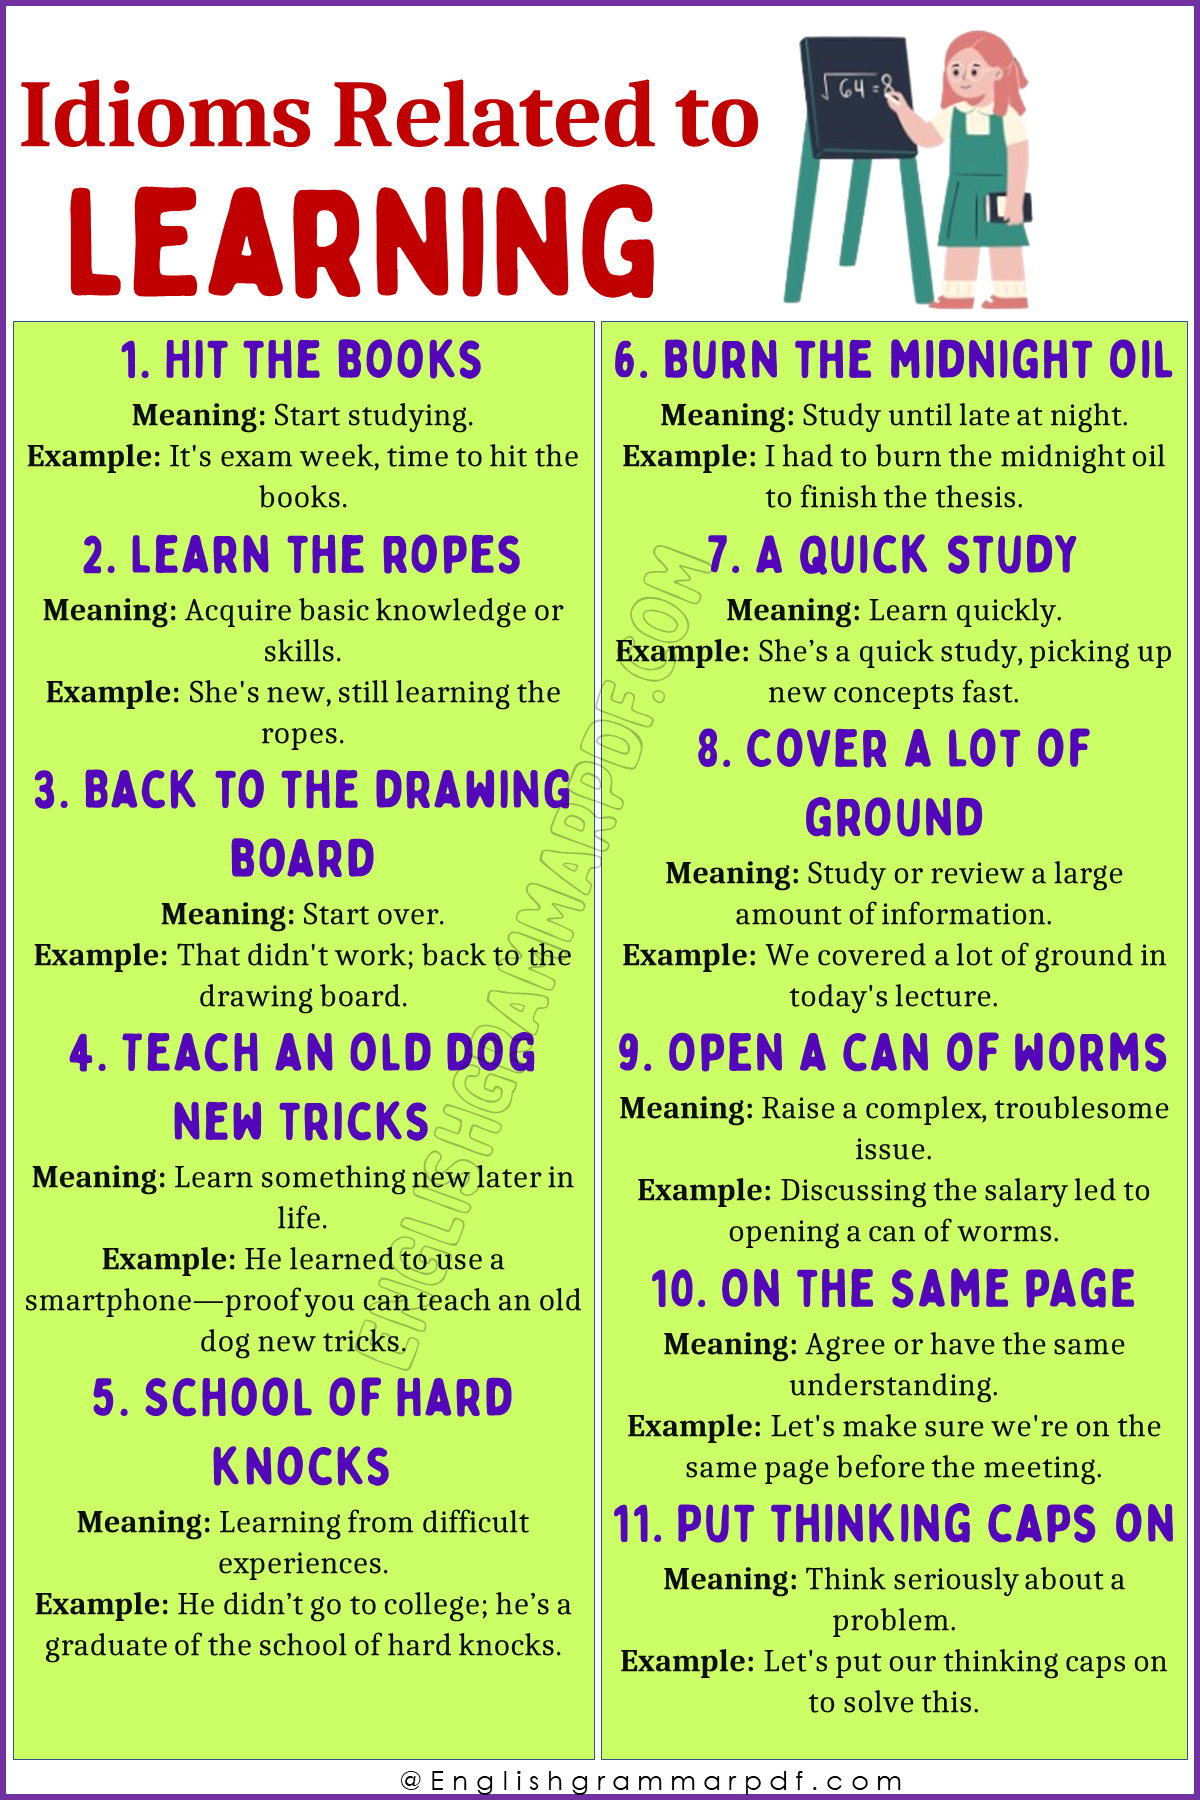 Idioms and Expressions Related to Learning